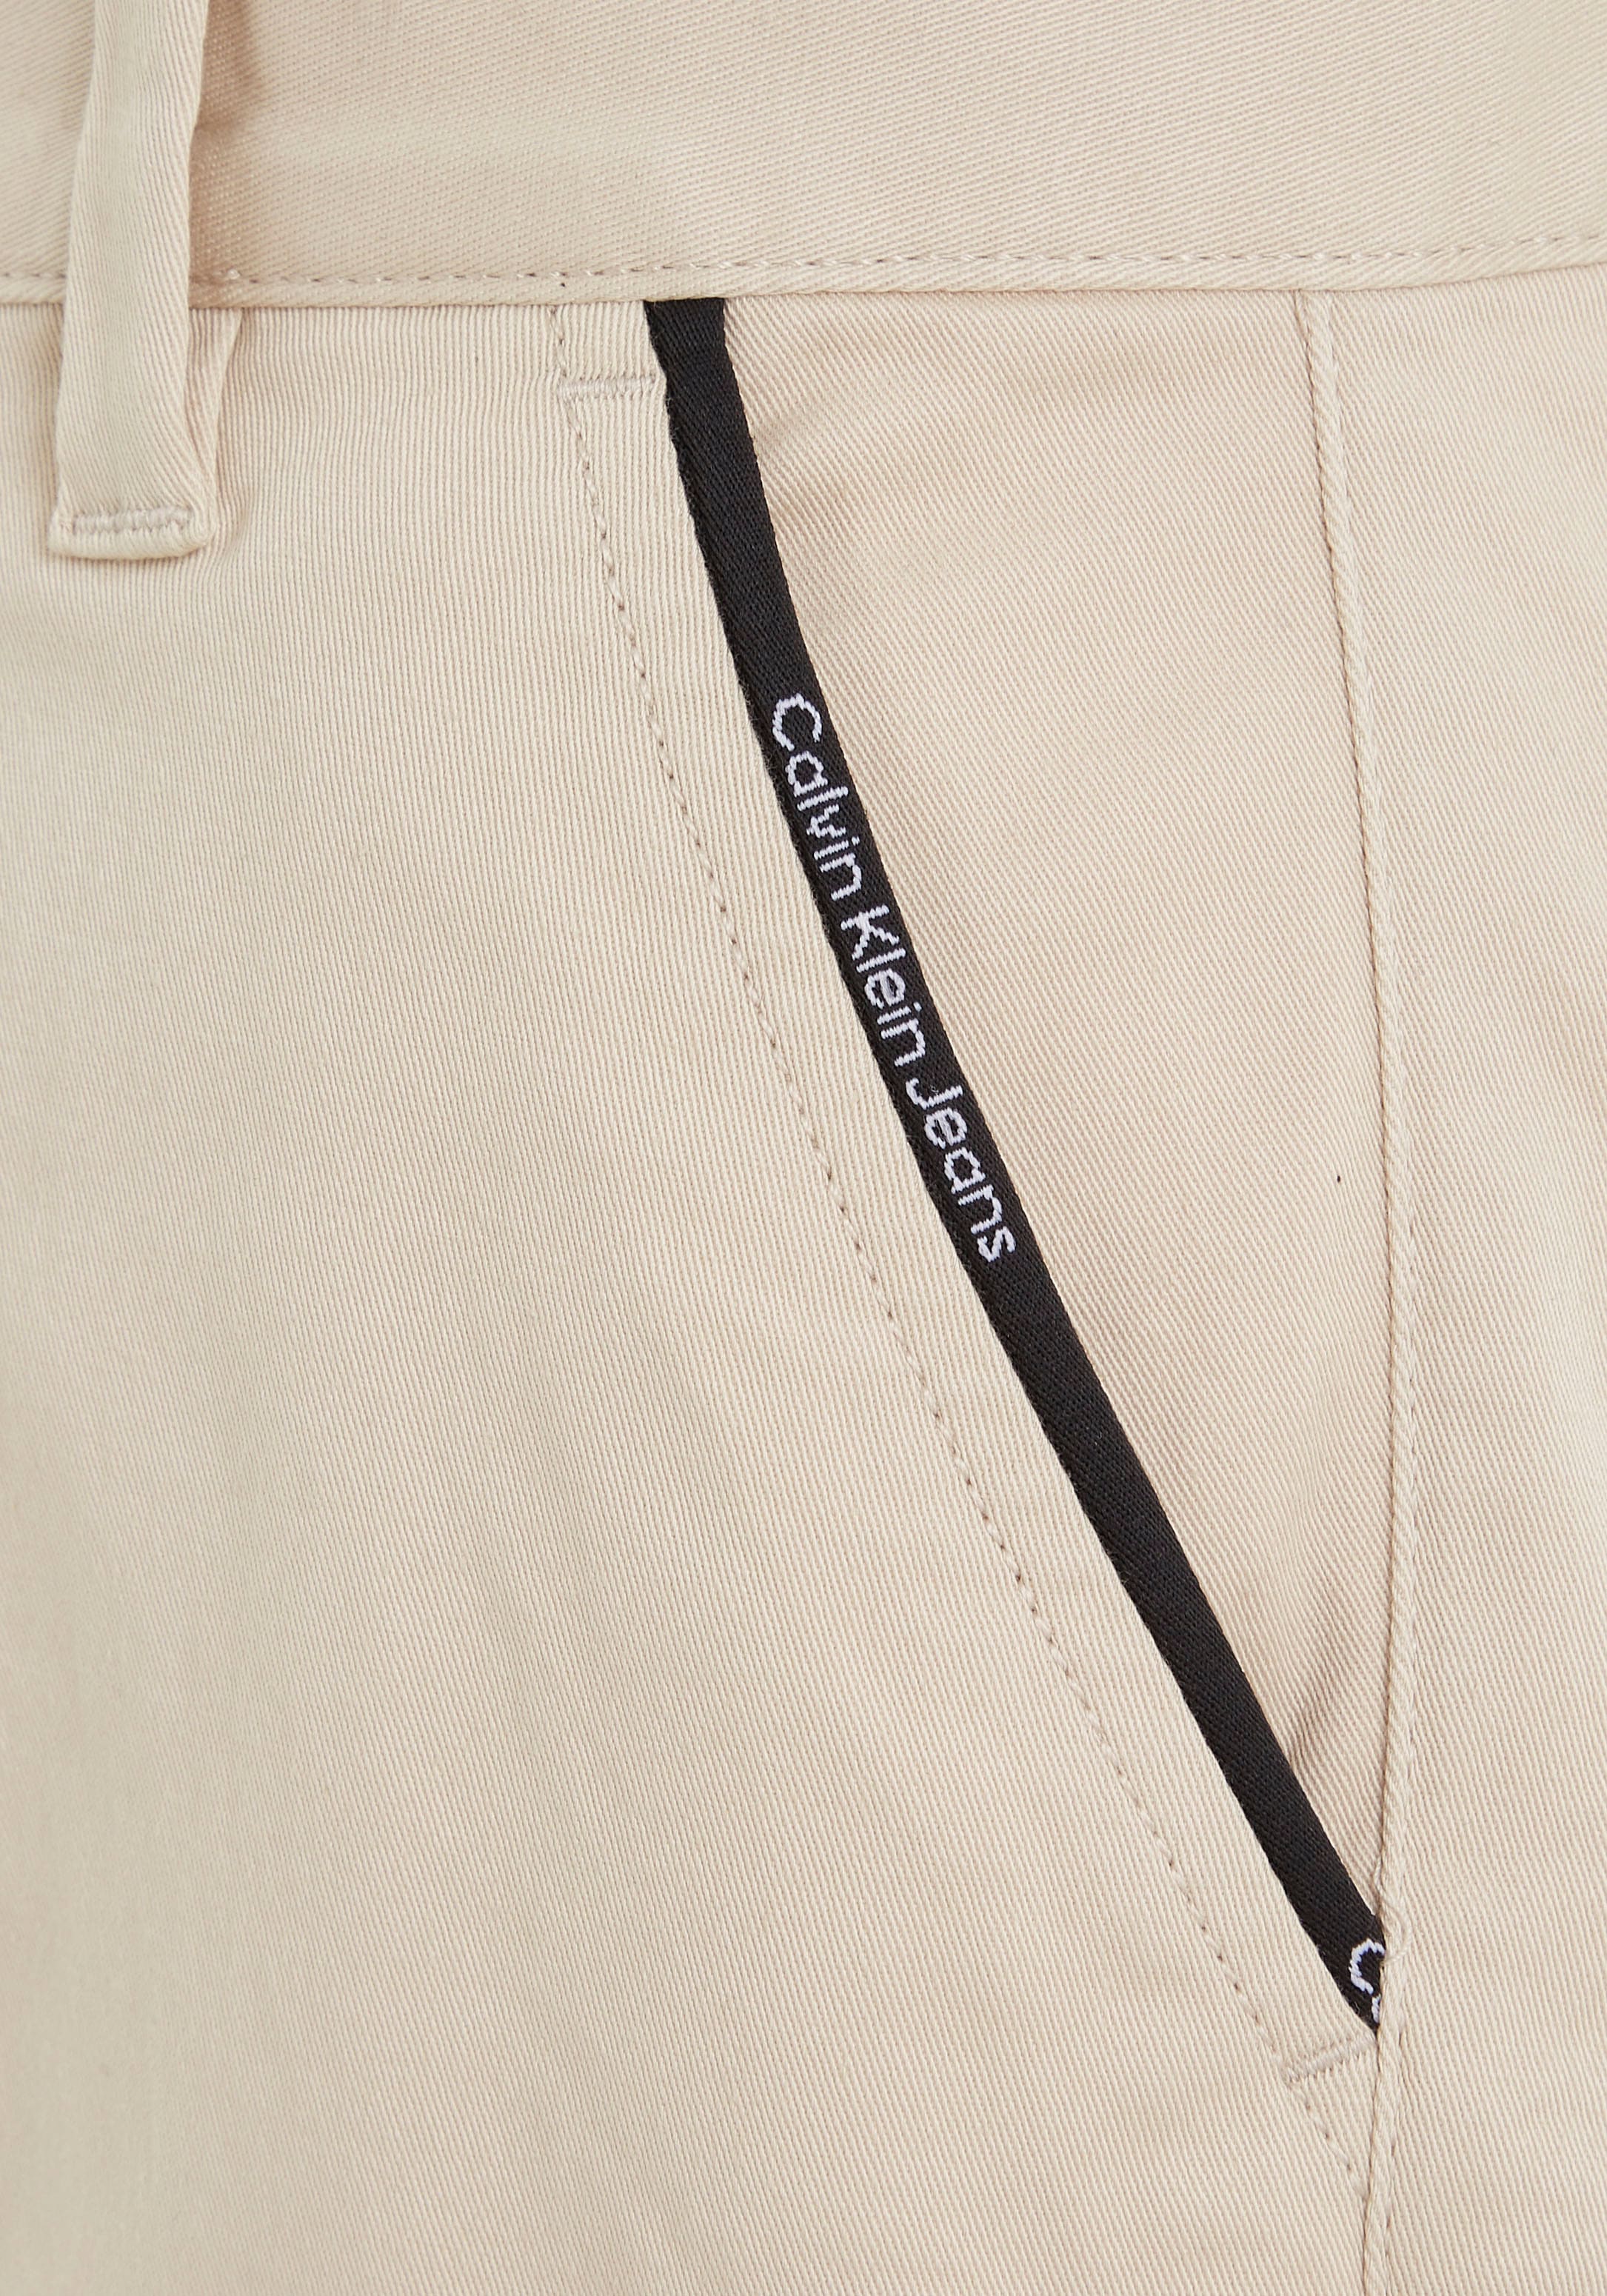 Calvin Klein Jeans Chinohose »CEREMONY TWILL CHINO PANTS«